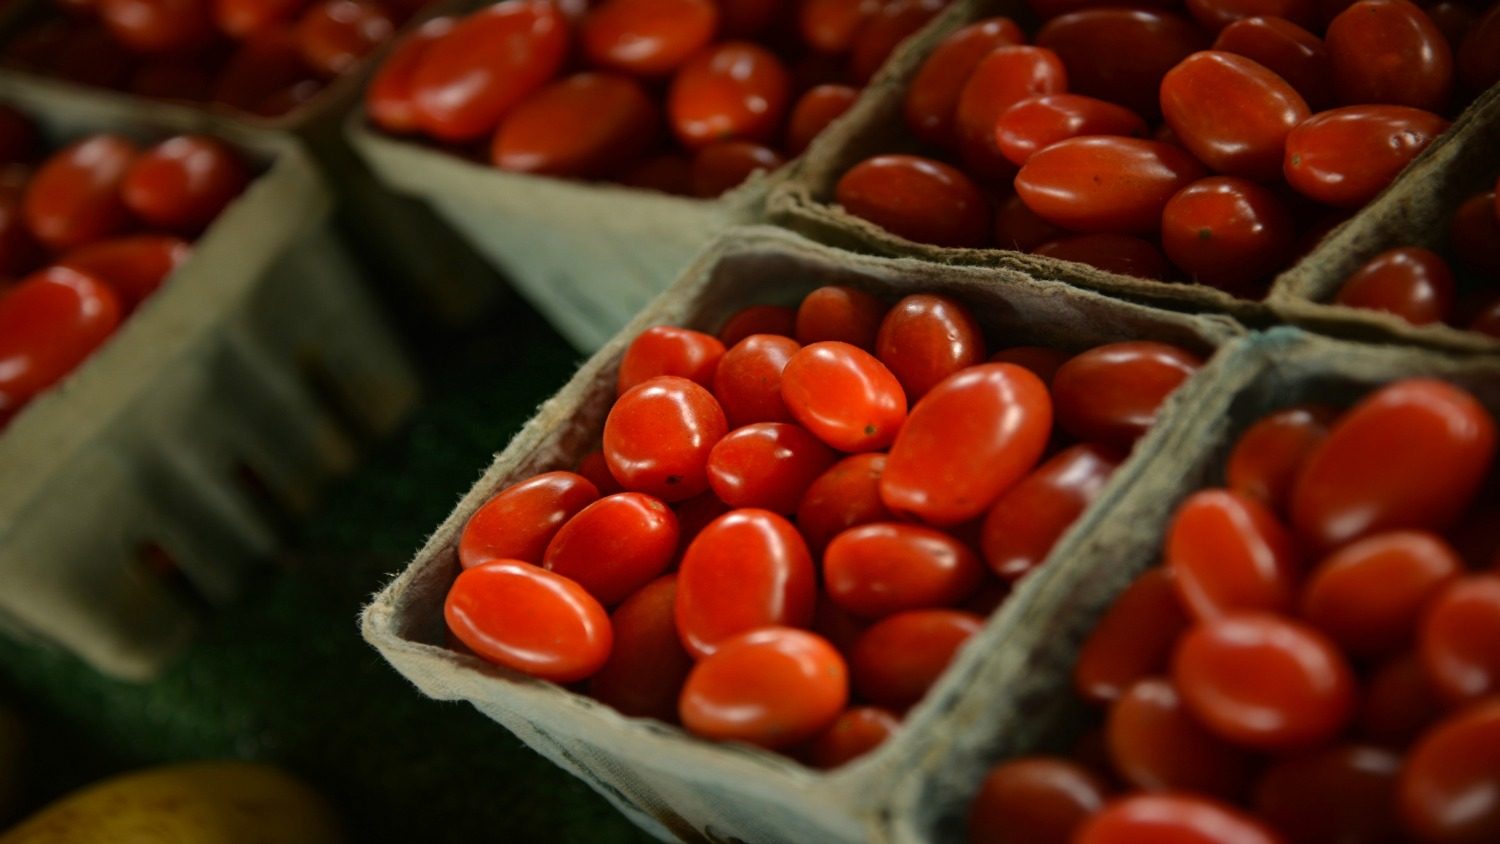 Cherry tomatoes for sale at the North Carolina State Farmer's Market in the Fall.